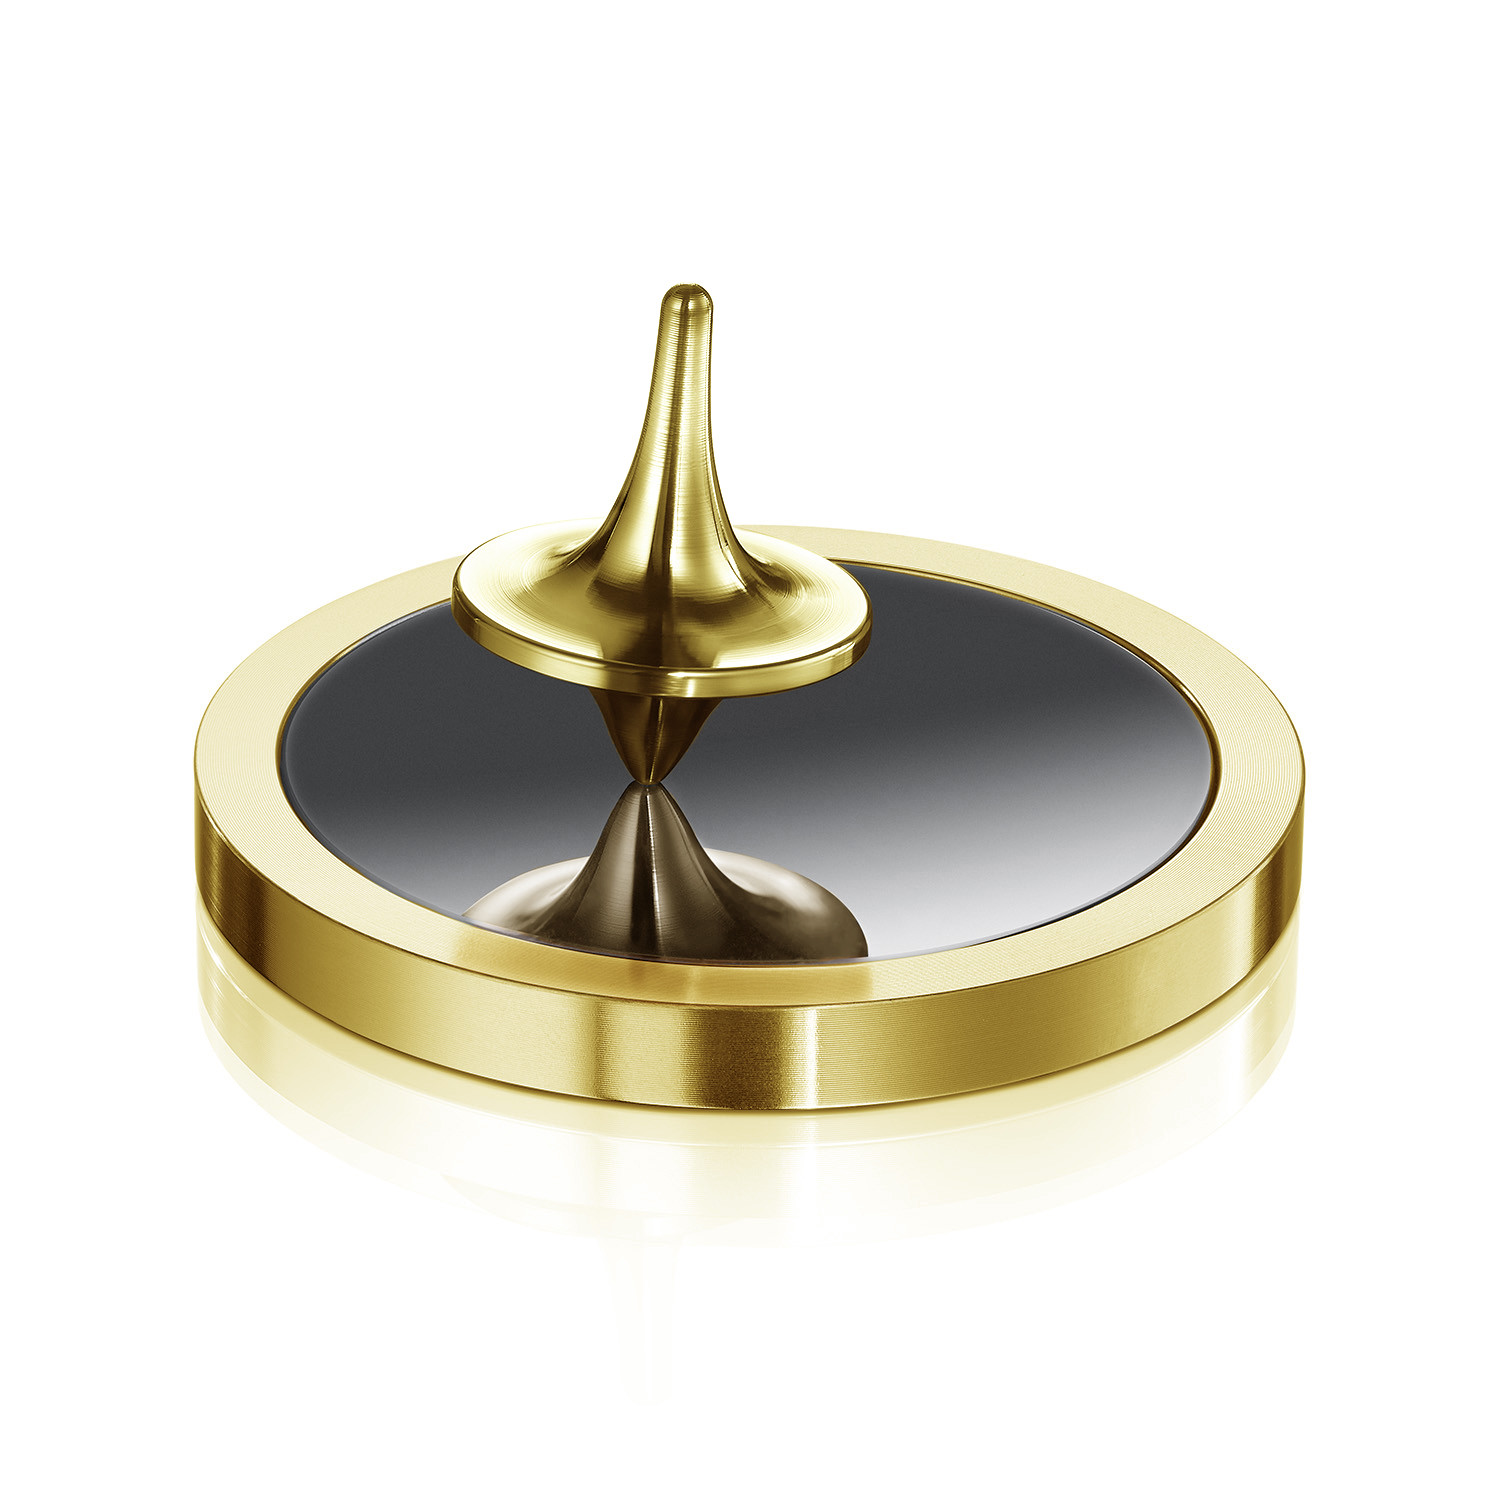 Spinning gold. FOREVERSPIN. FOREVERSPIN 2.0. FOREVERSPIN Gift. Spinning Top Gold.